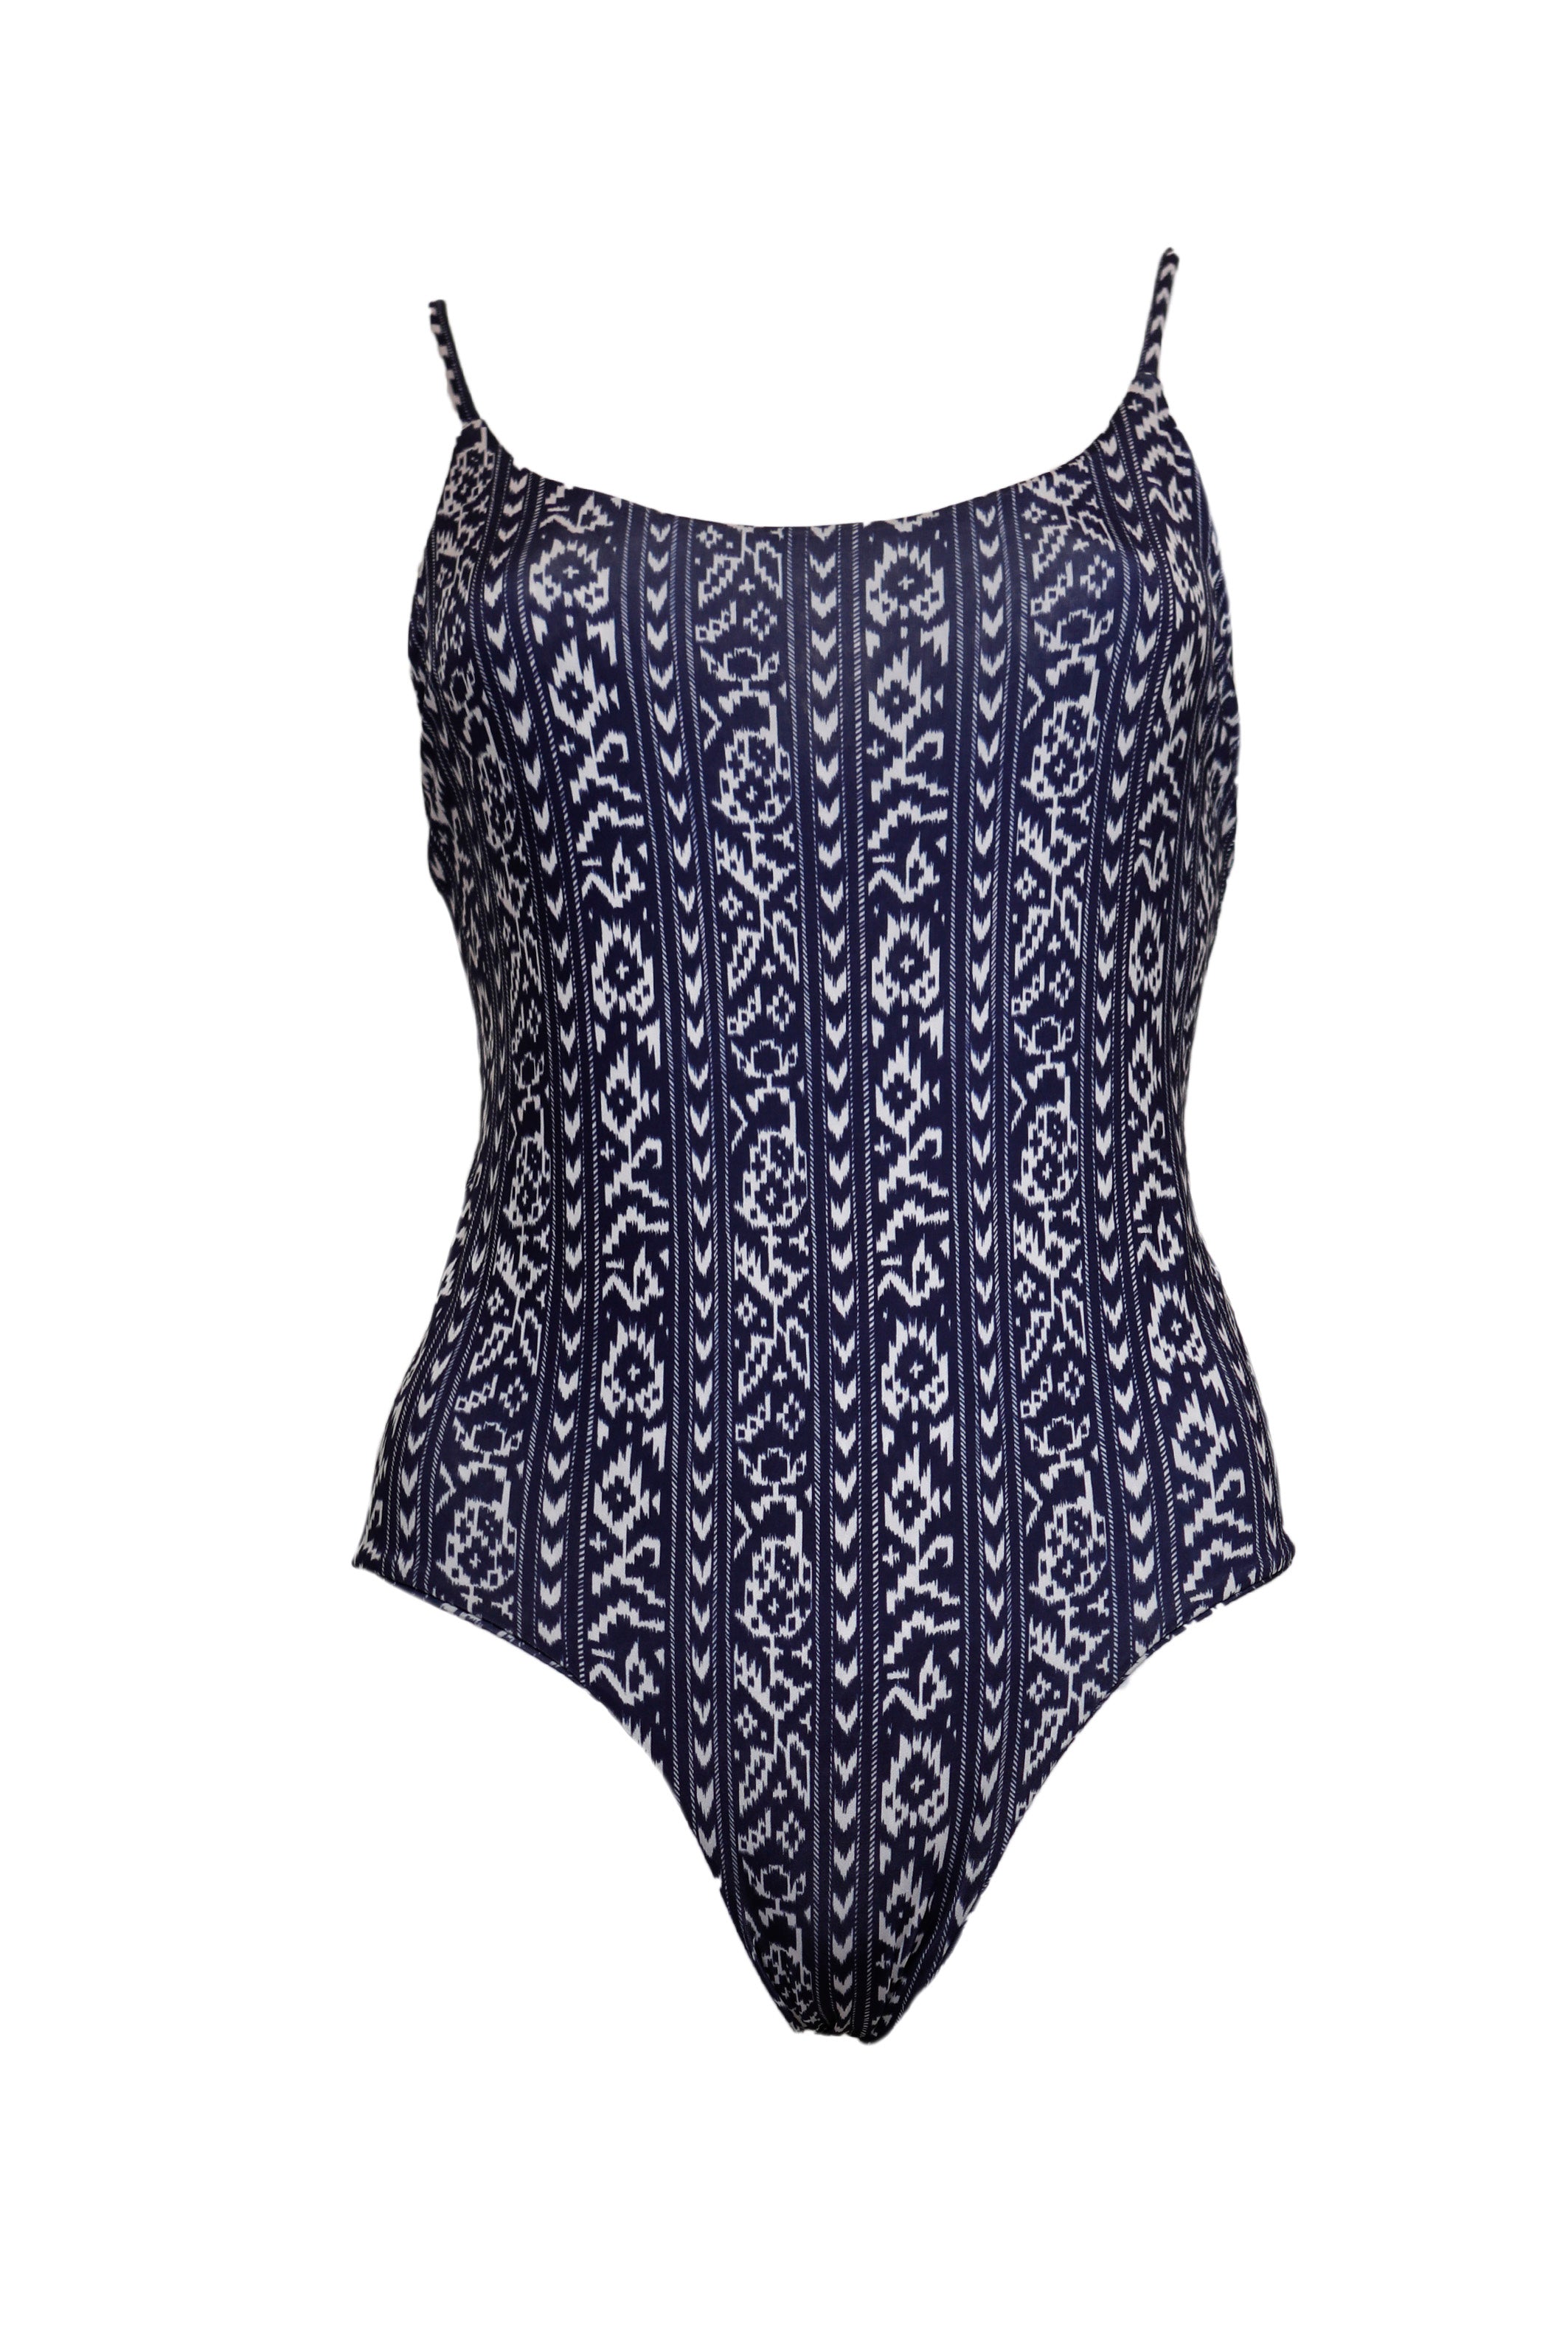 FEDERICA - one-piece swimsuit in India print lycra